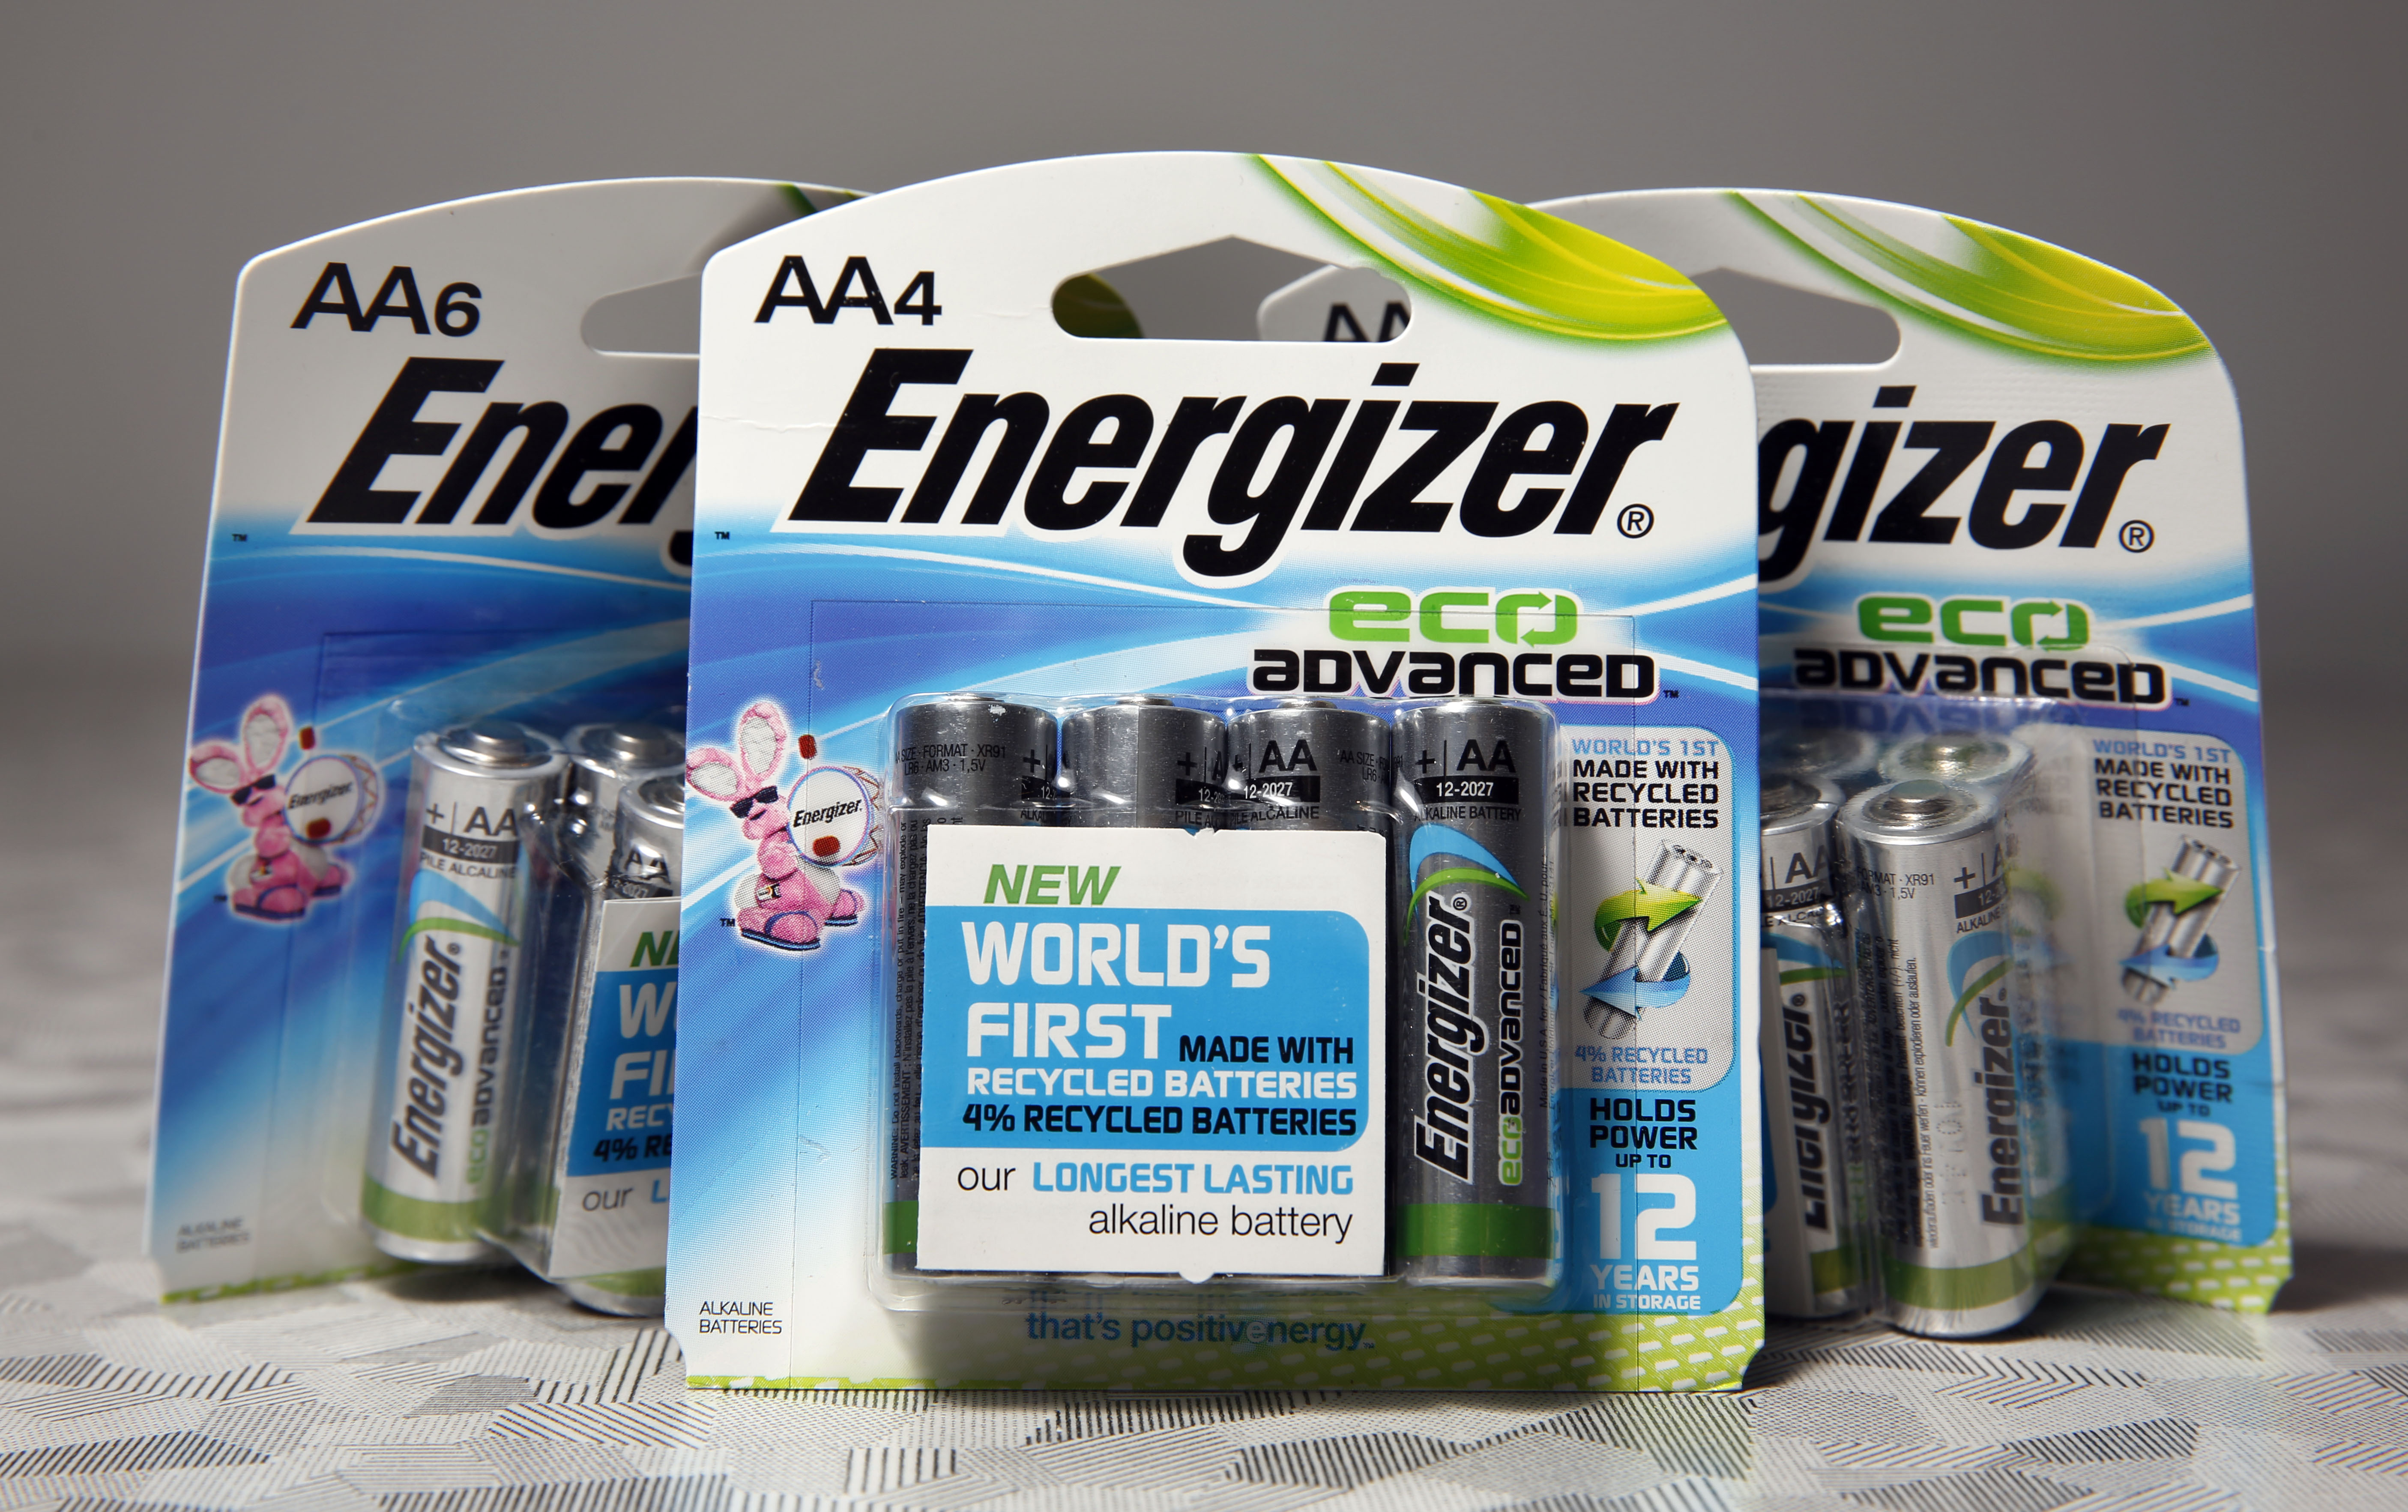 St. Louis, MO - Energizer Debuts Recycled AA And AAA Batteries